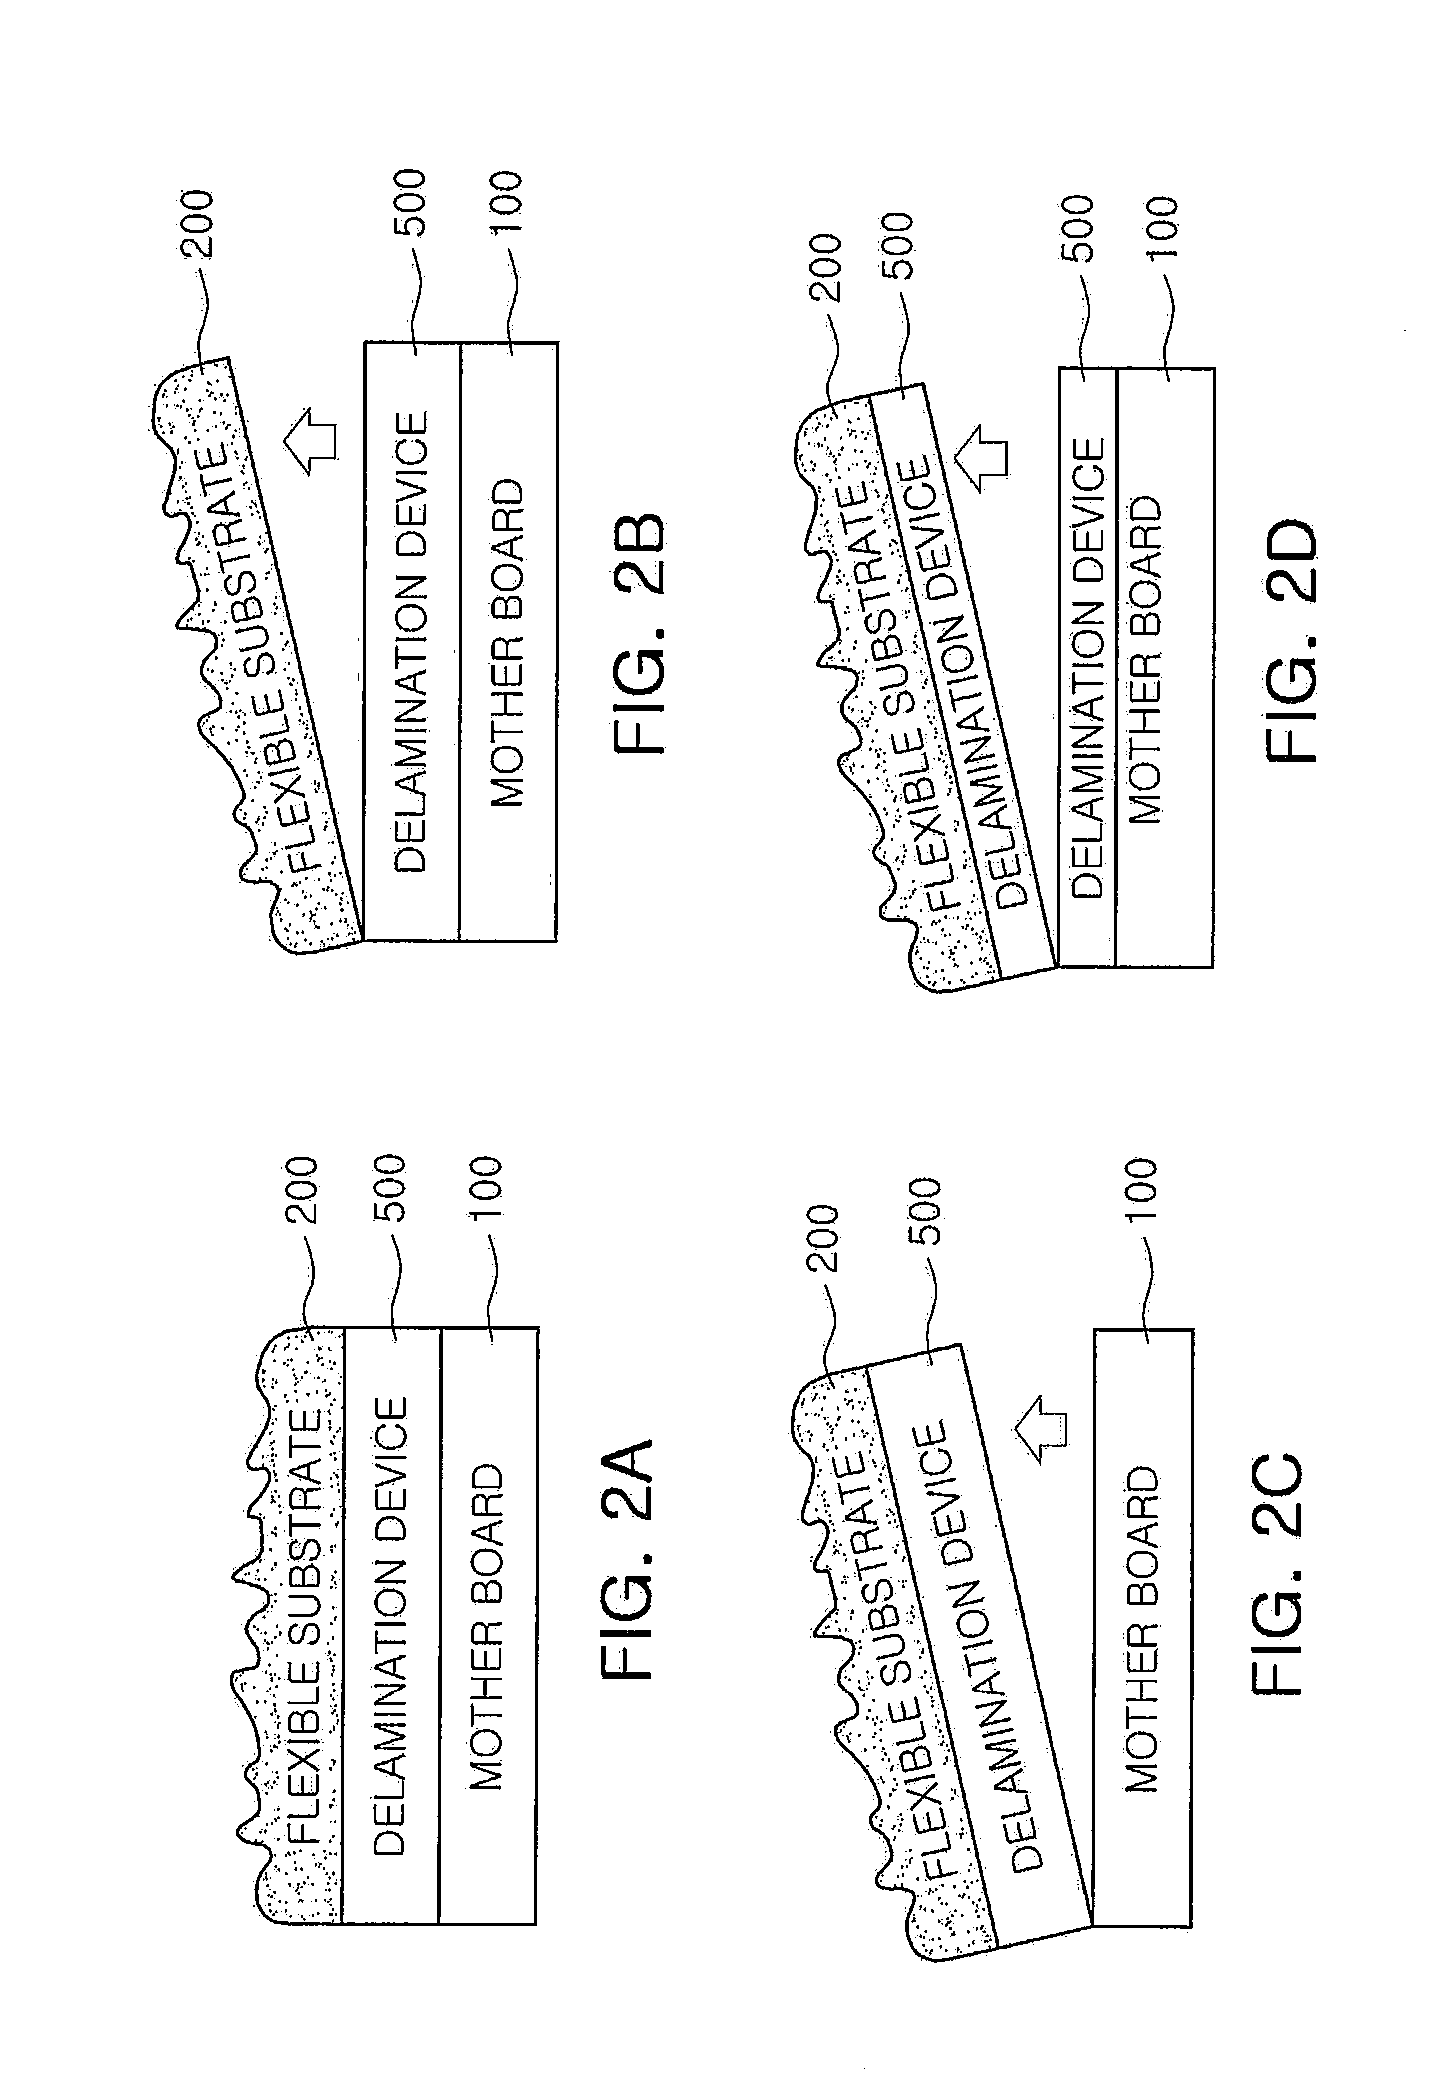 Flexible electronic device, method for manufacturing same, and a flexible substrate